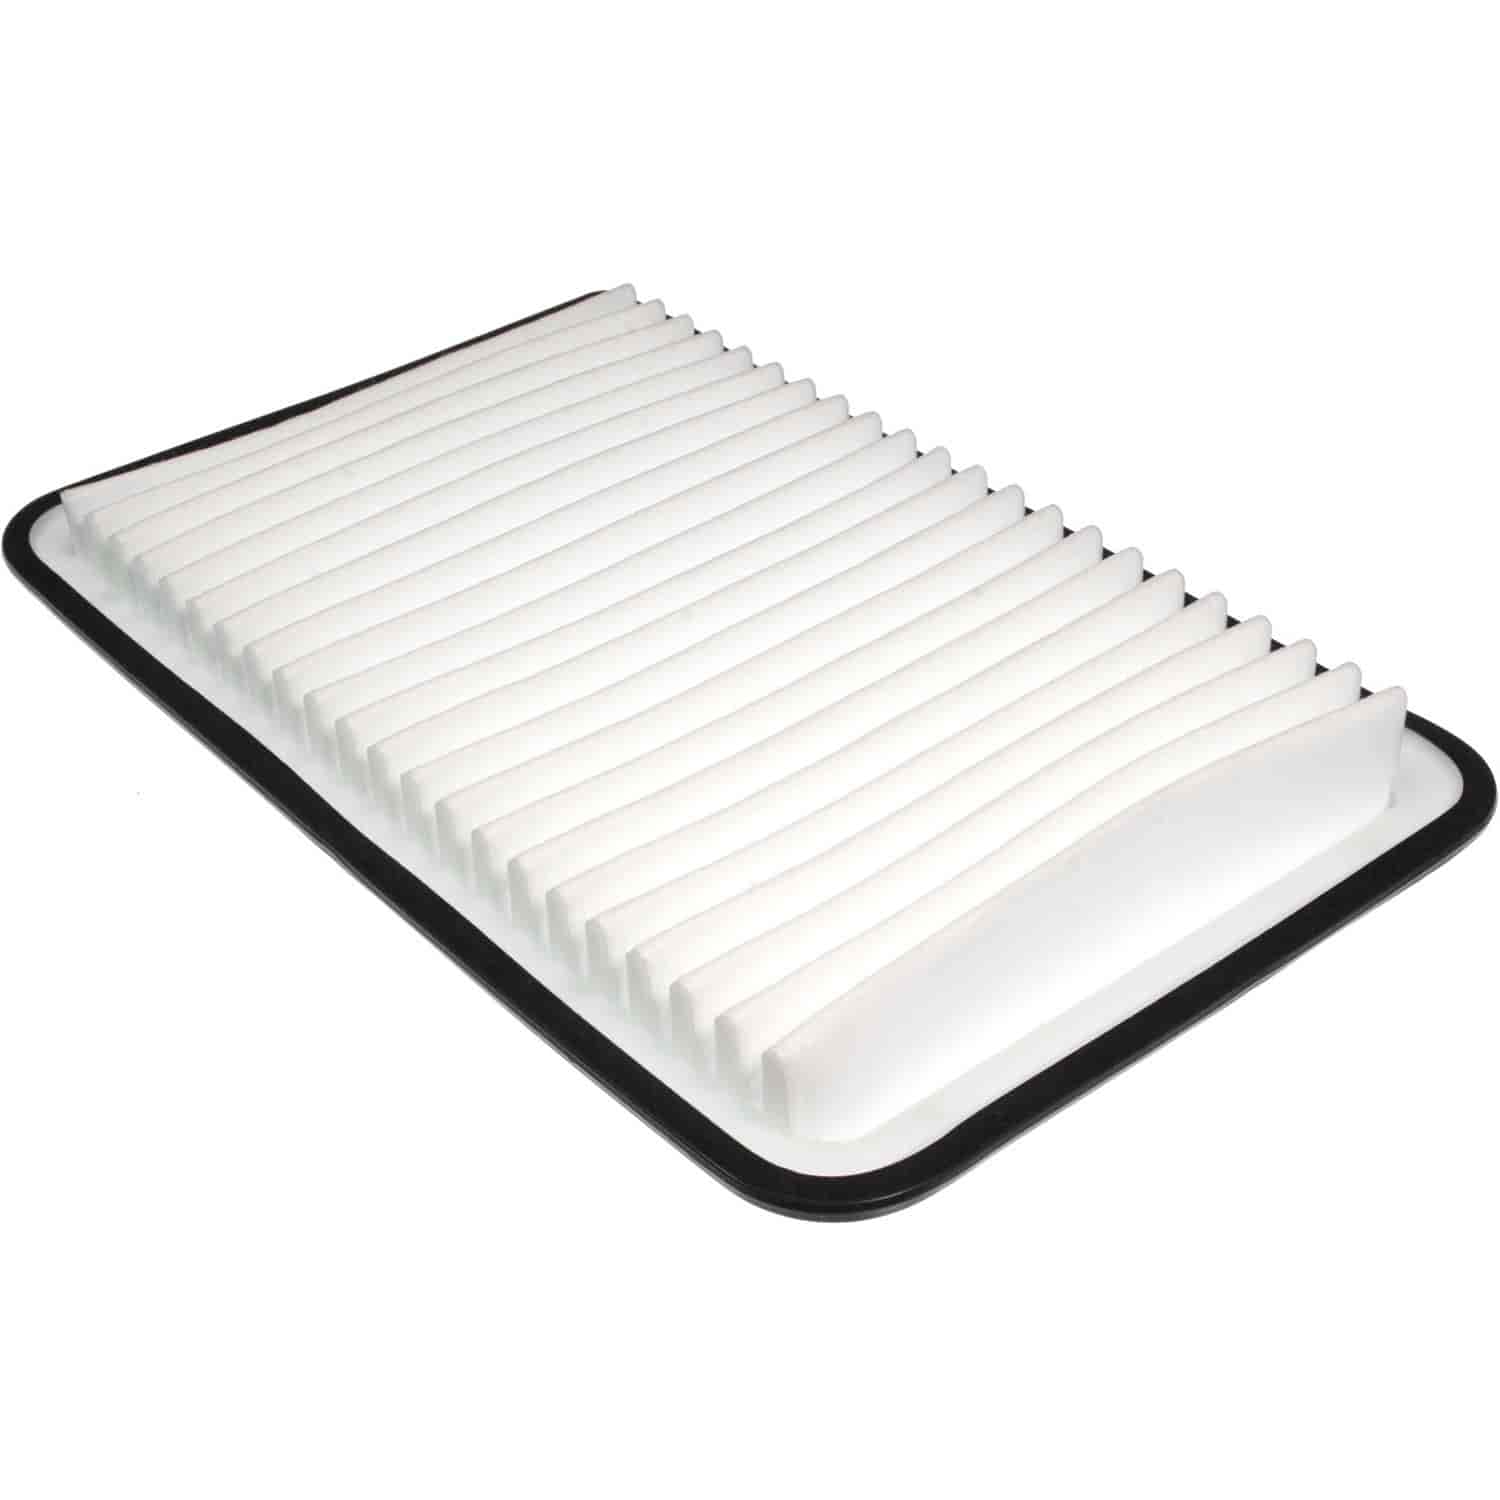 Mahle Air Filter Mazda 2 1.5L MZR VIN Y and Z 2011-2012